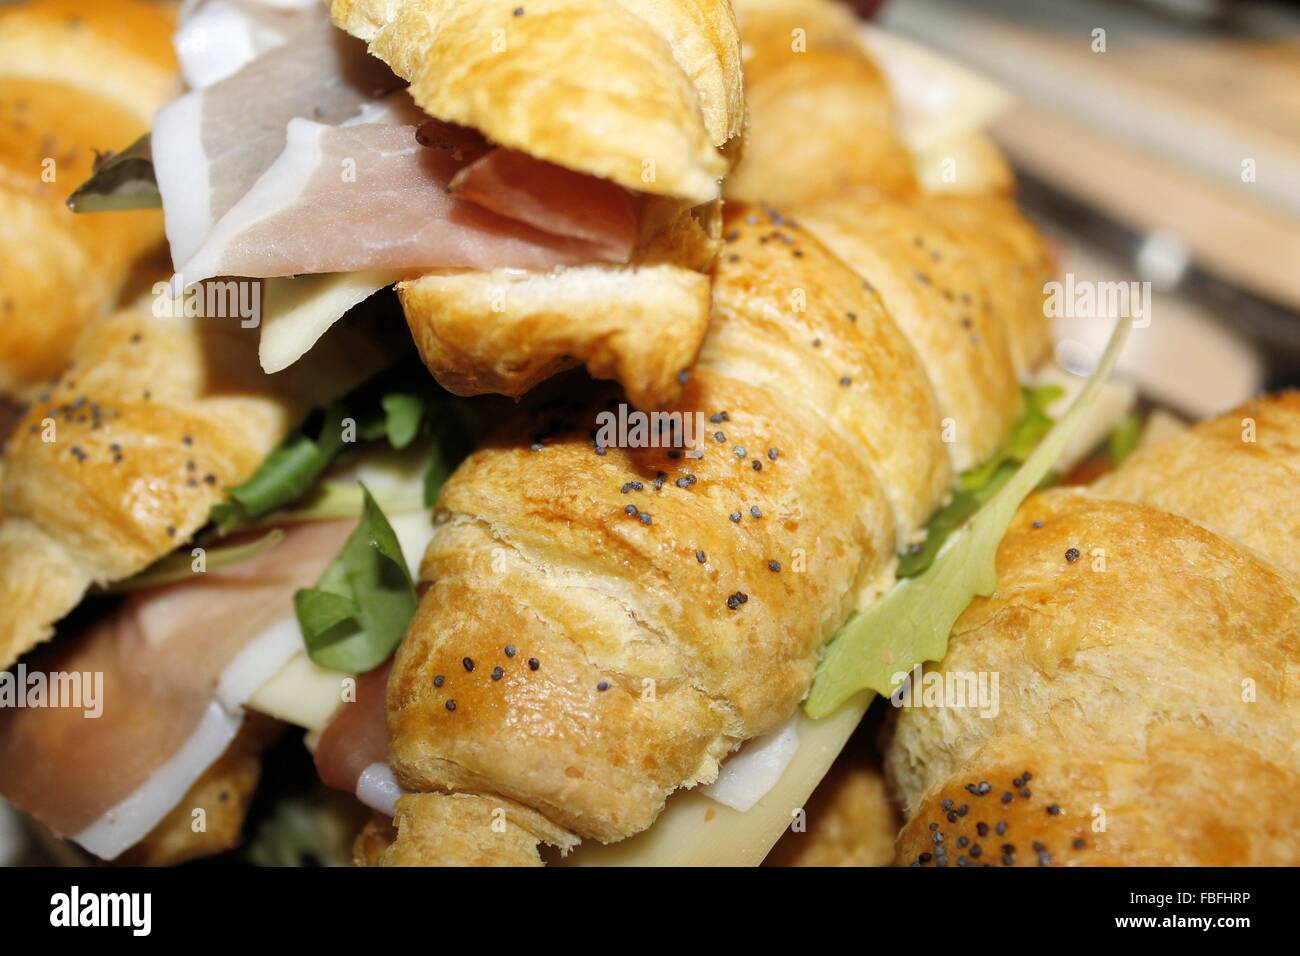 small sandwiches filled with ham, cheese and lettuce Stock Photo